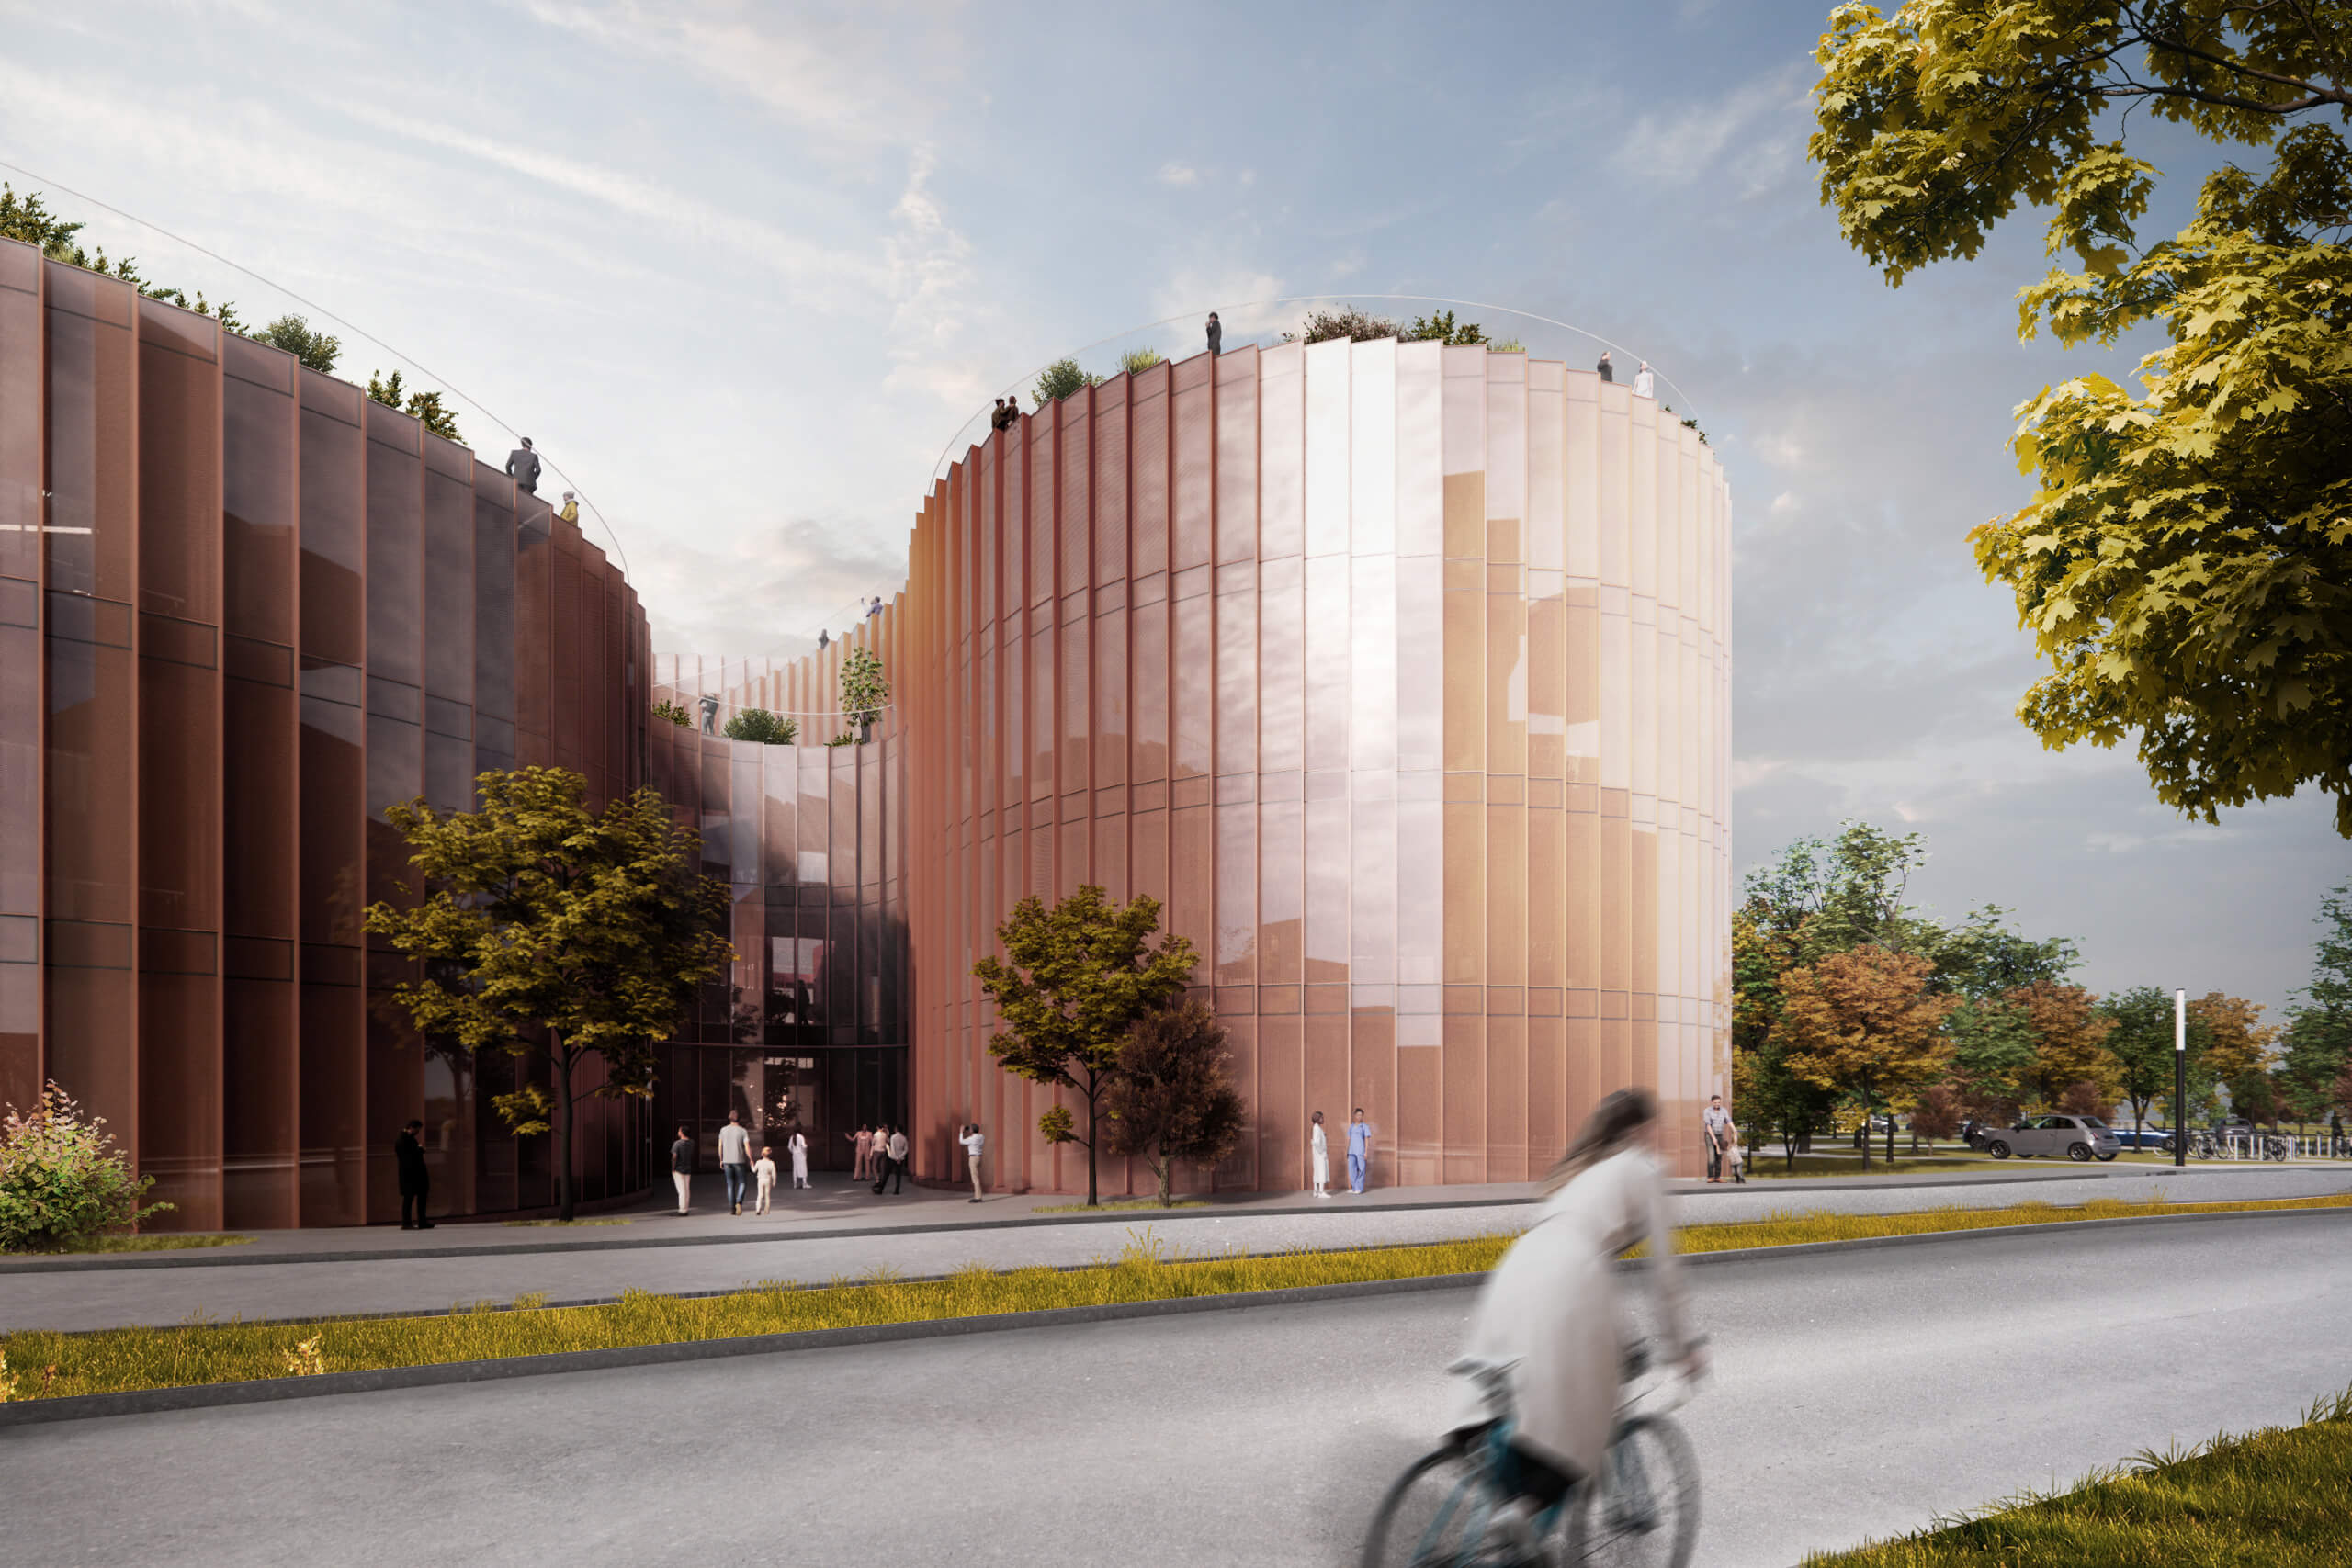 rendering of a person riding a bike next to a curving, red-hued building